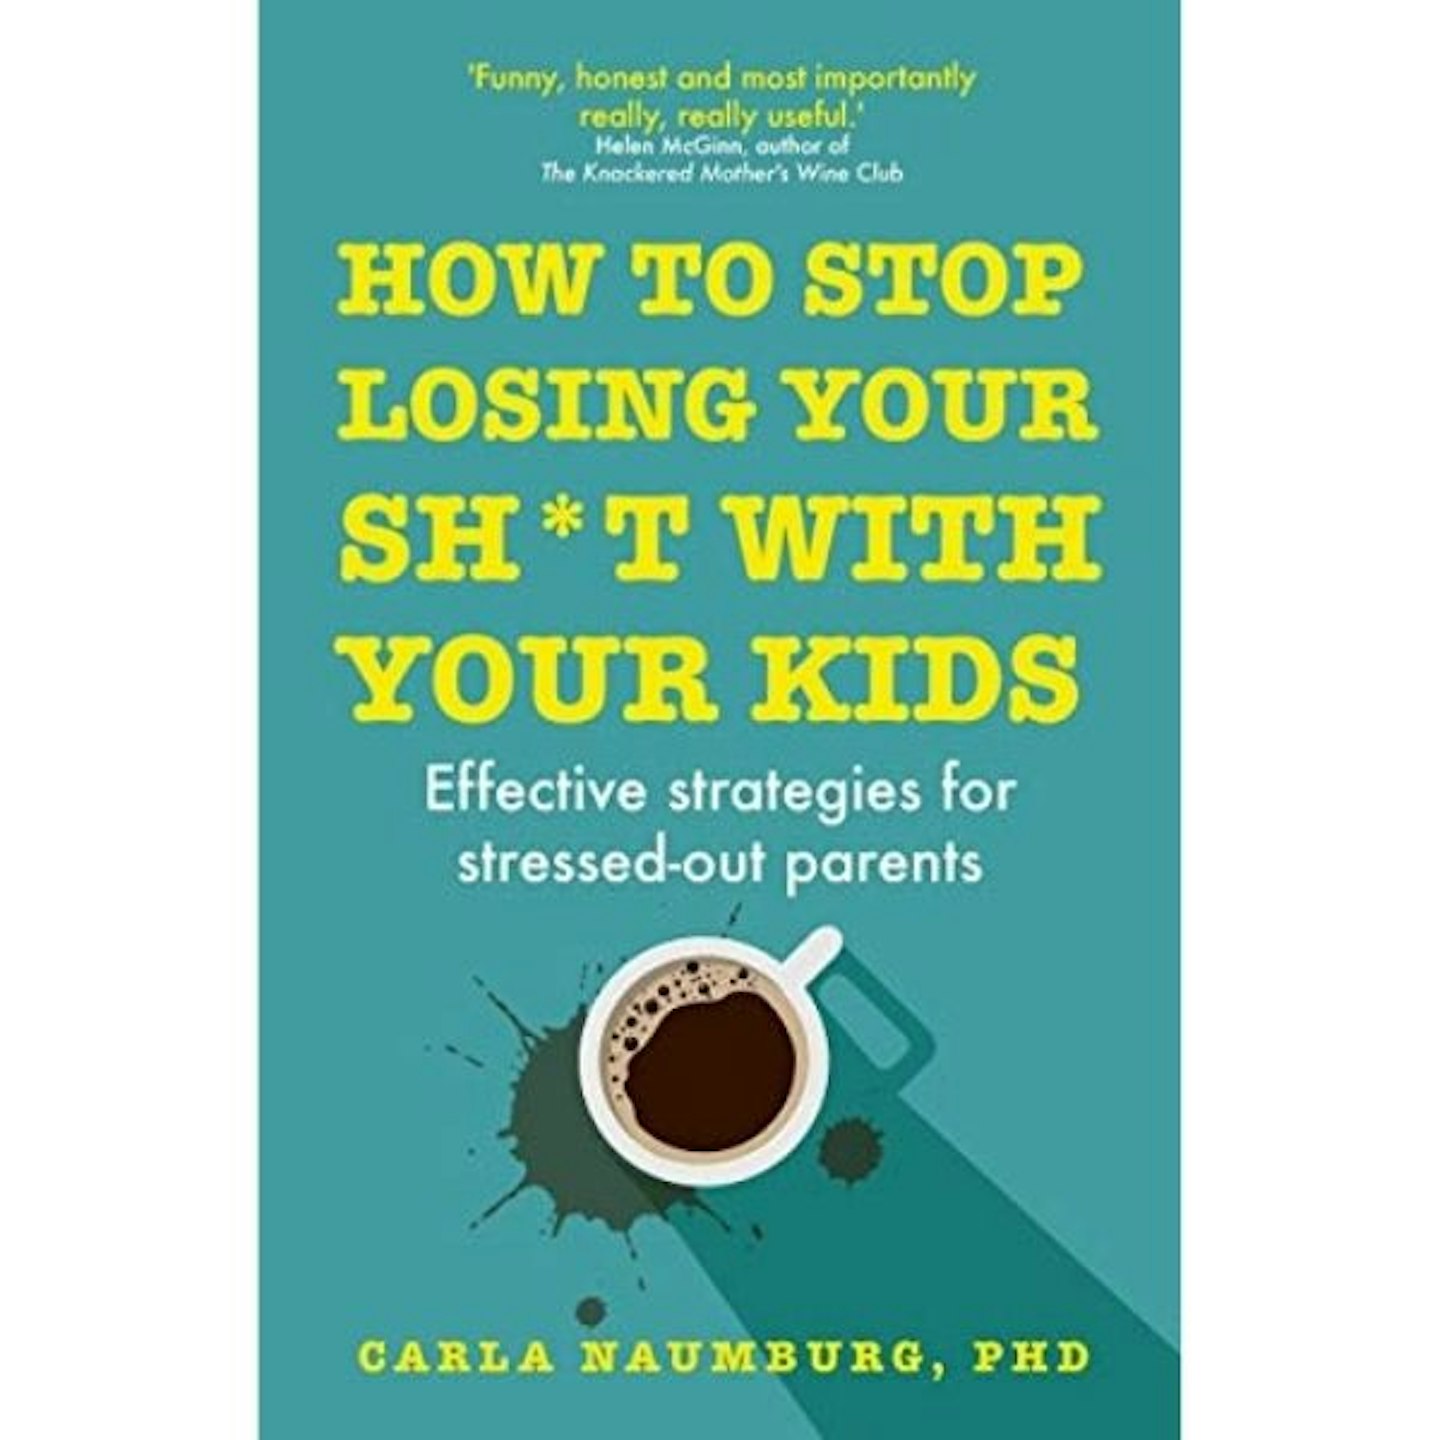 How to Stop Losing Your Sh*t with Your Kids, By Carla Naumburg PhD